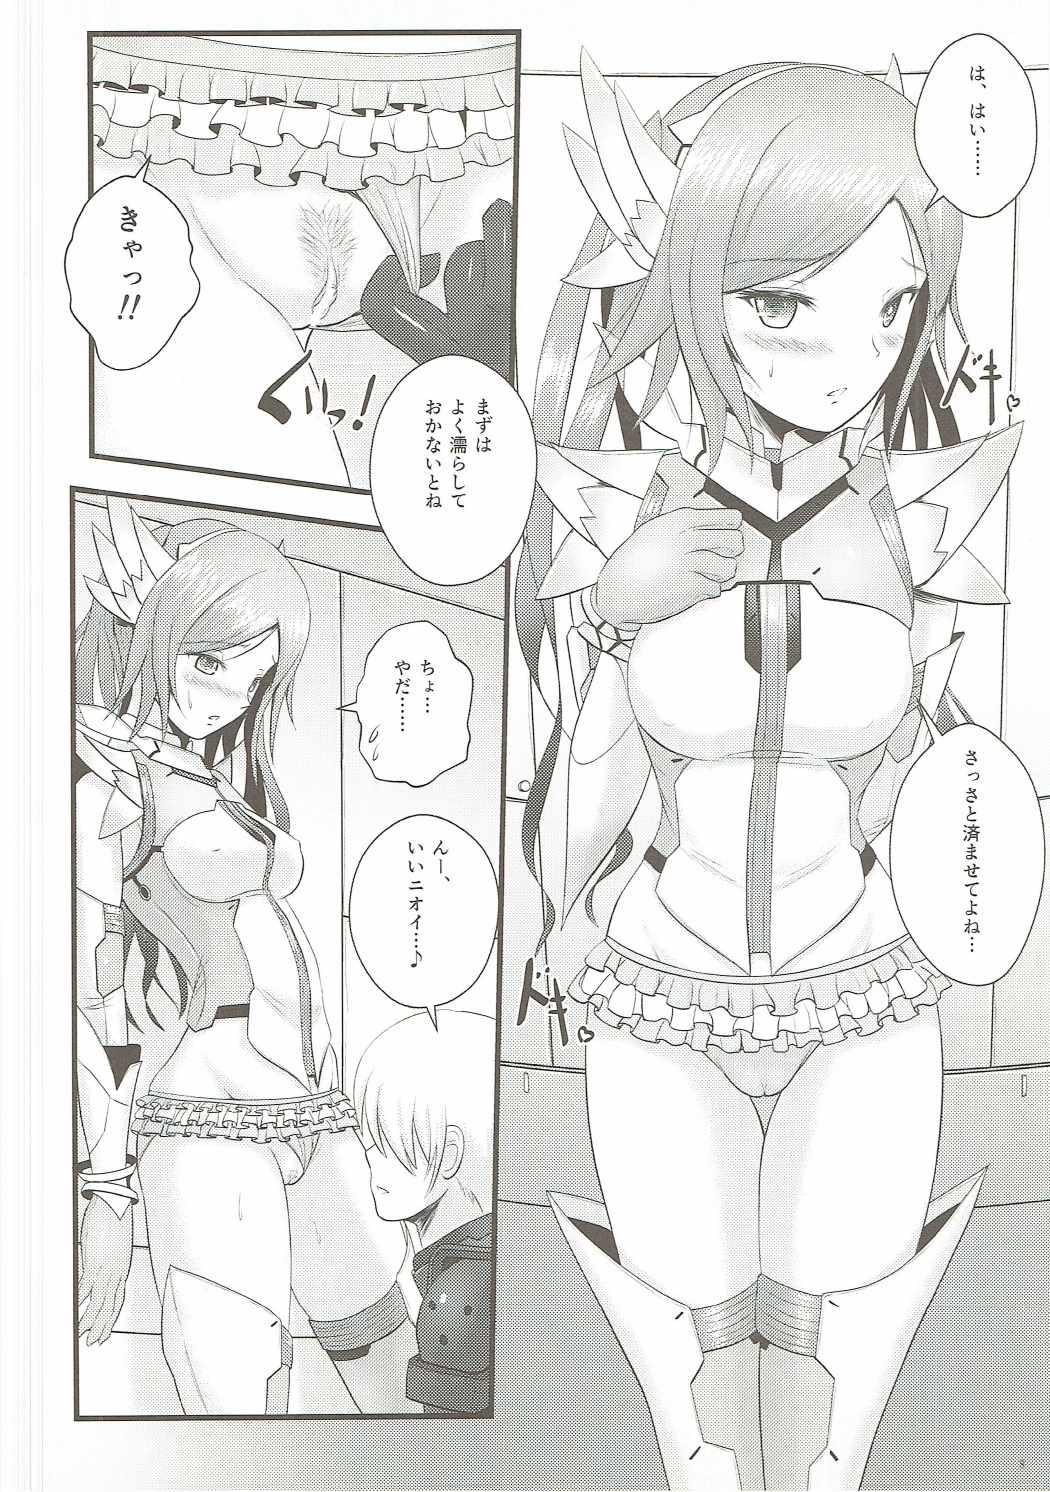 Swing Seagull's Love Song - Phantasy star online 2 Sex - Page 5